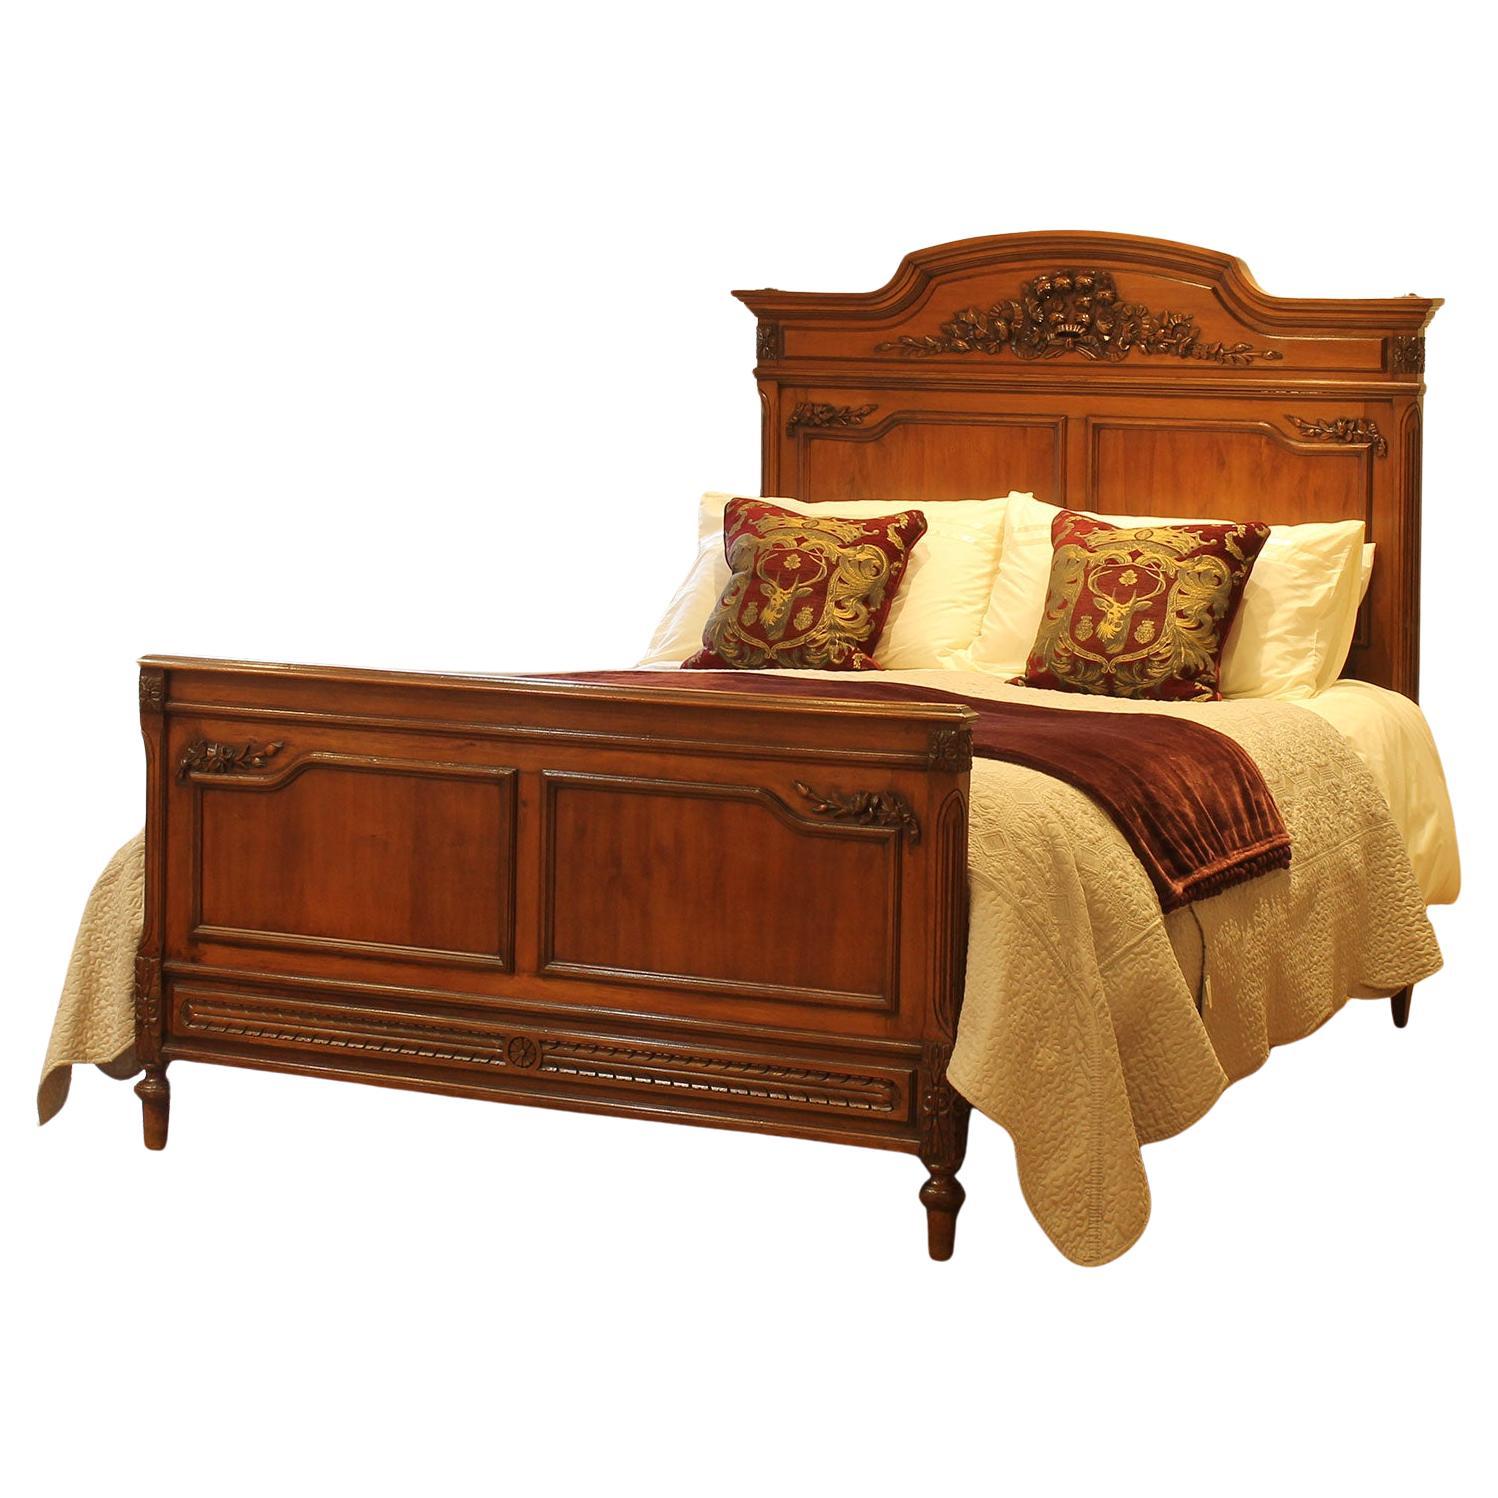 French Wooden Antique Bed, WK189